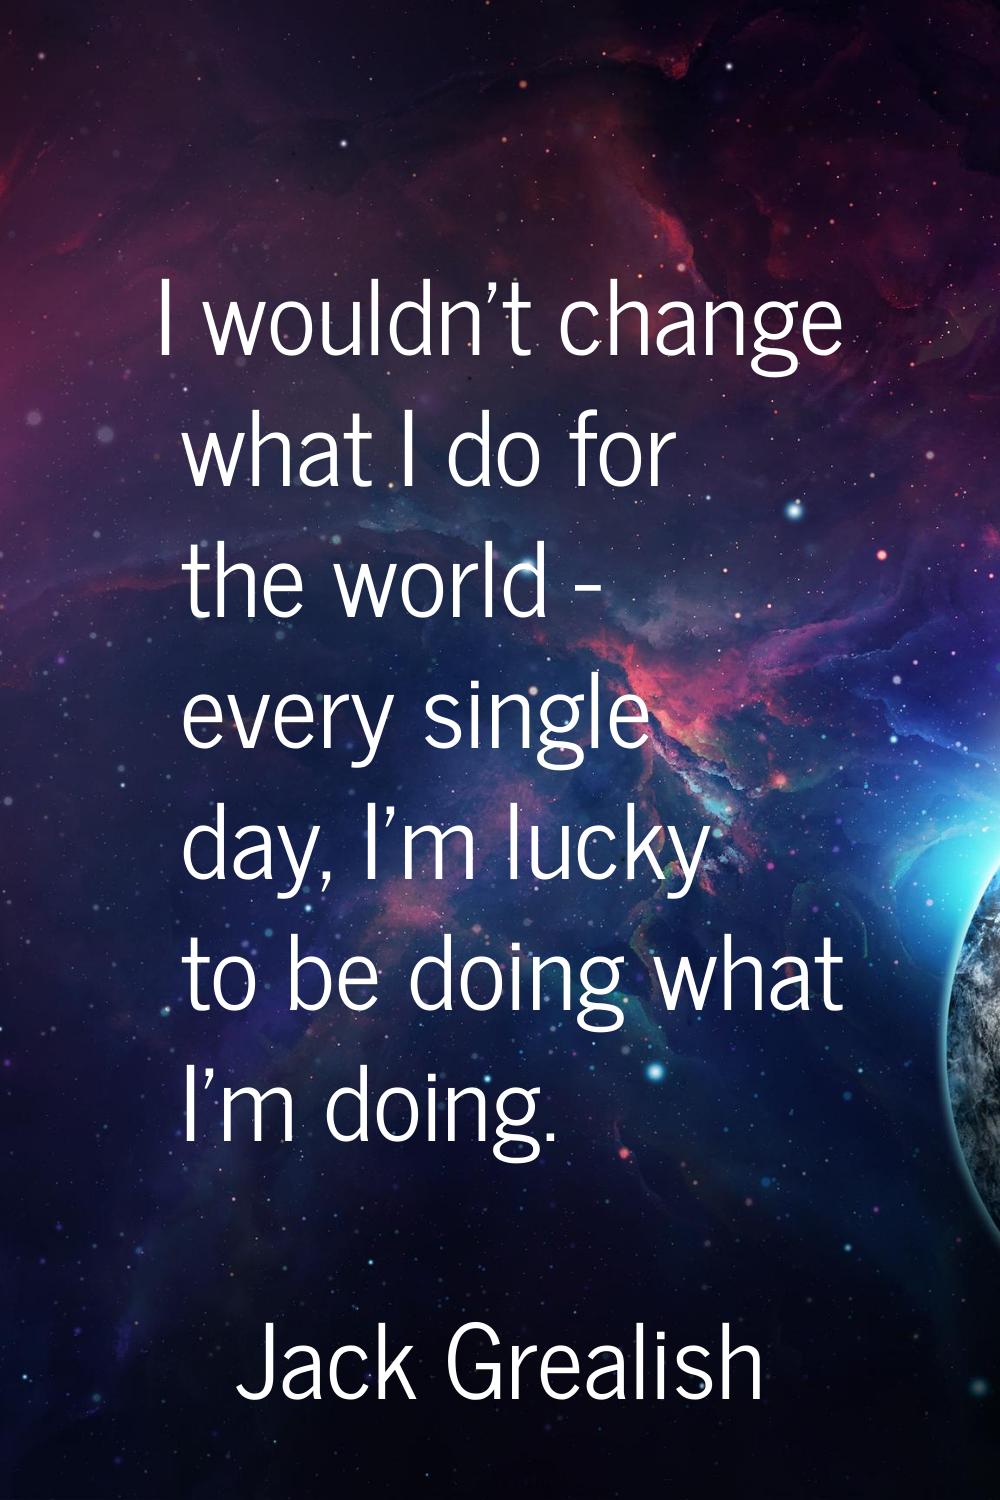 I wouldn't change what I do for the world - every single day, I'm lucky to be doing what I'm doing.